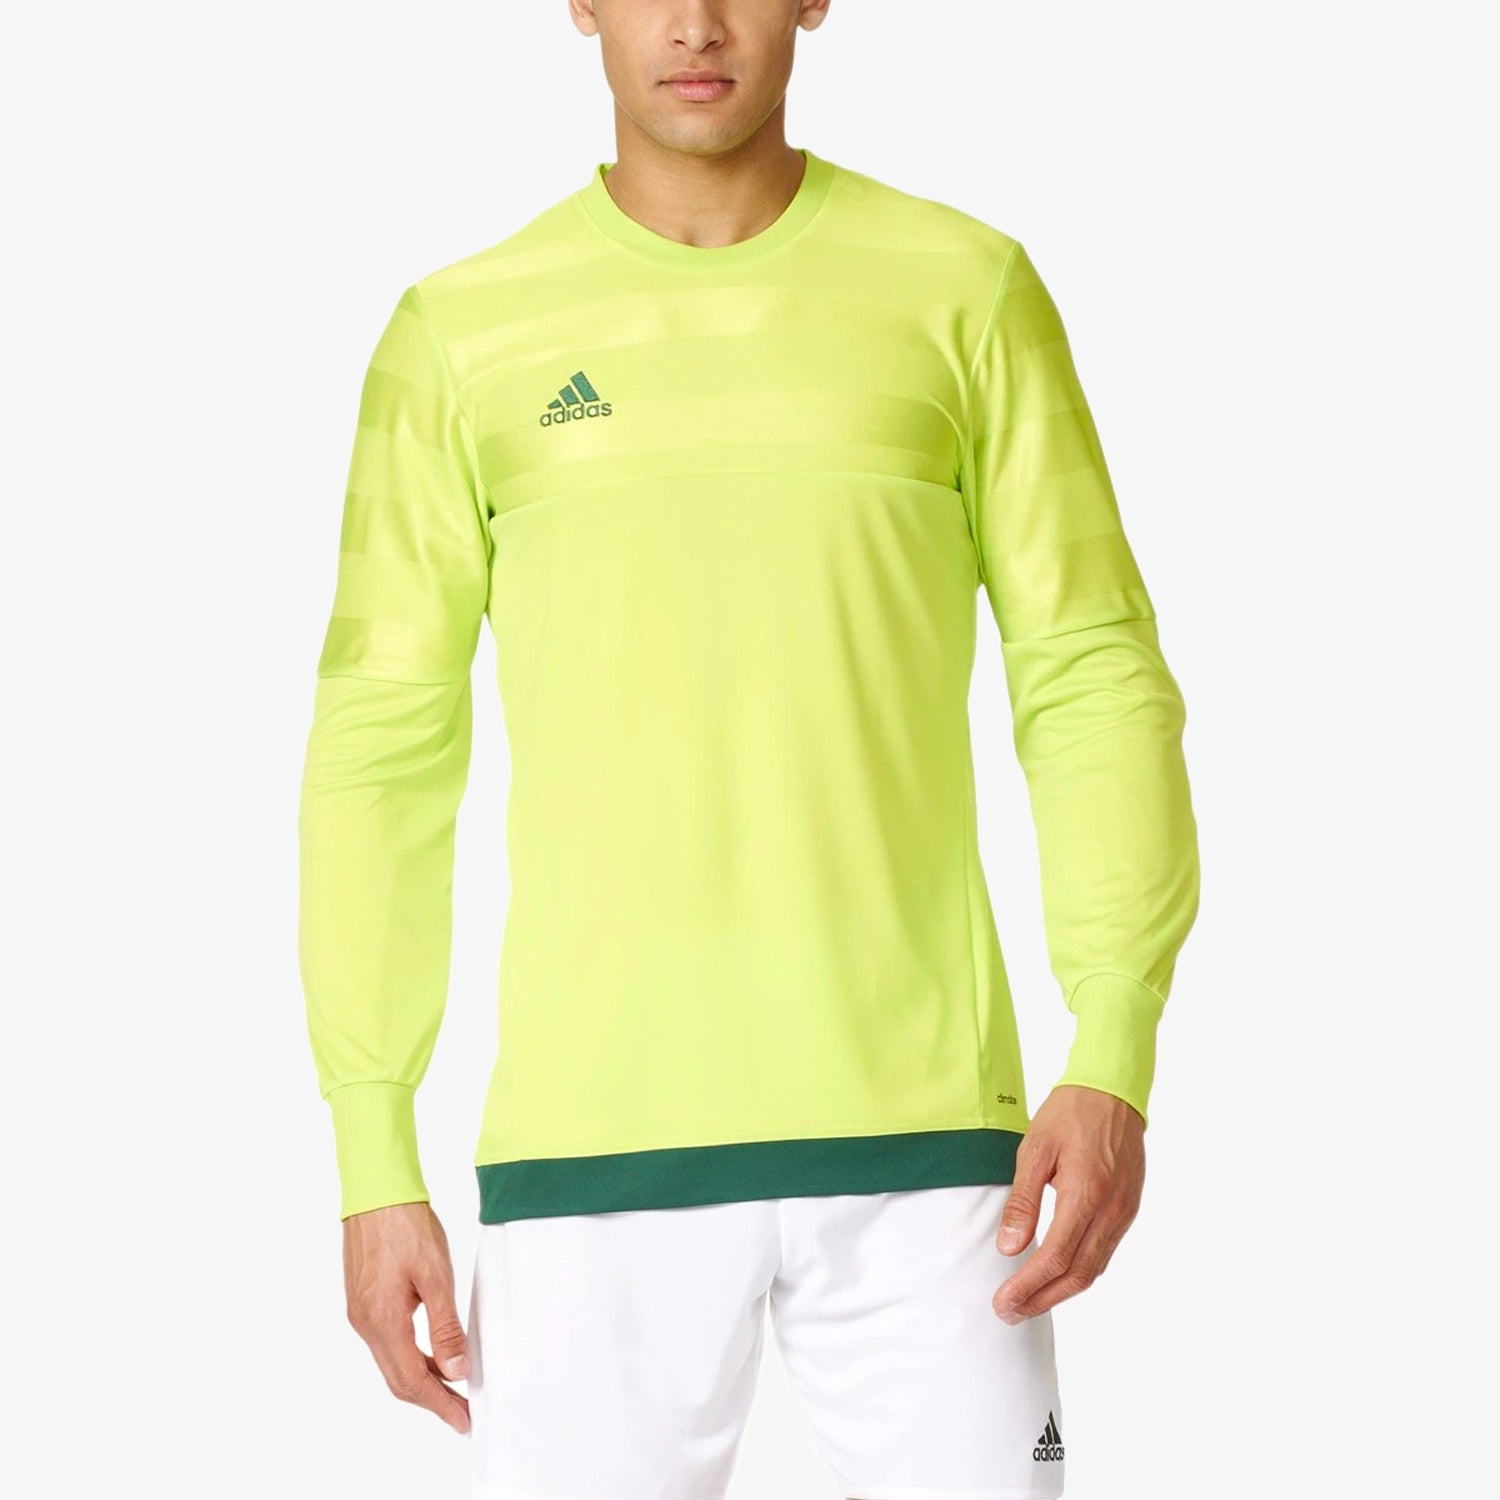 adidas Youth Entry 15 Goalkeeper Soccer Jersey